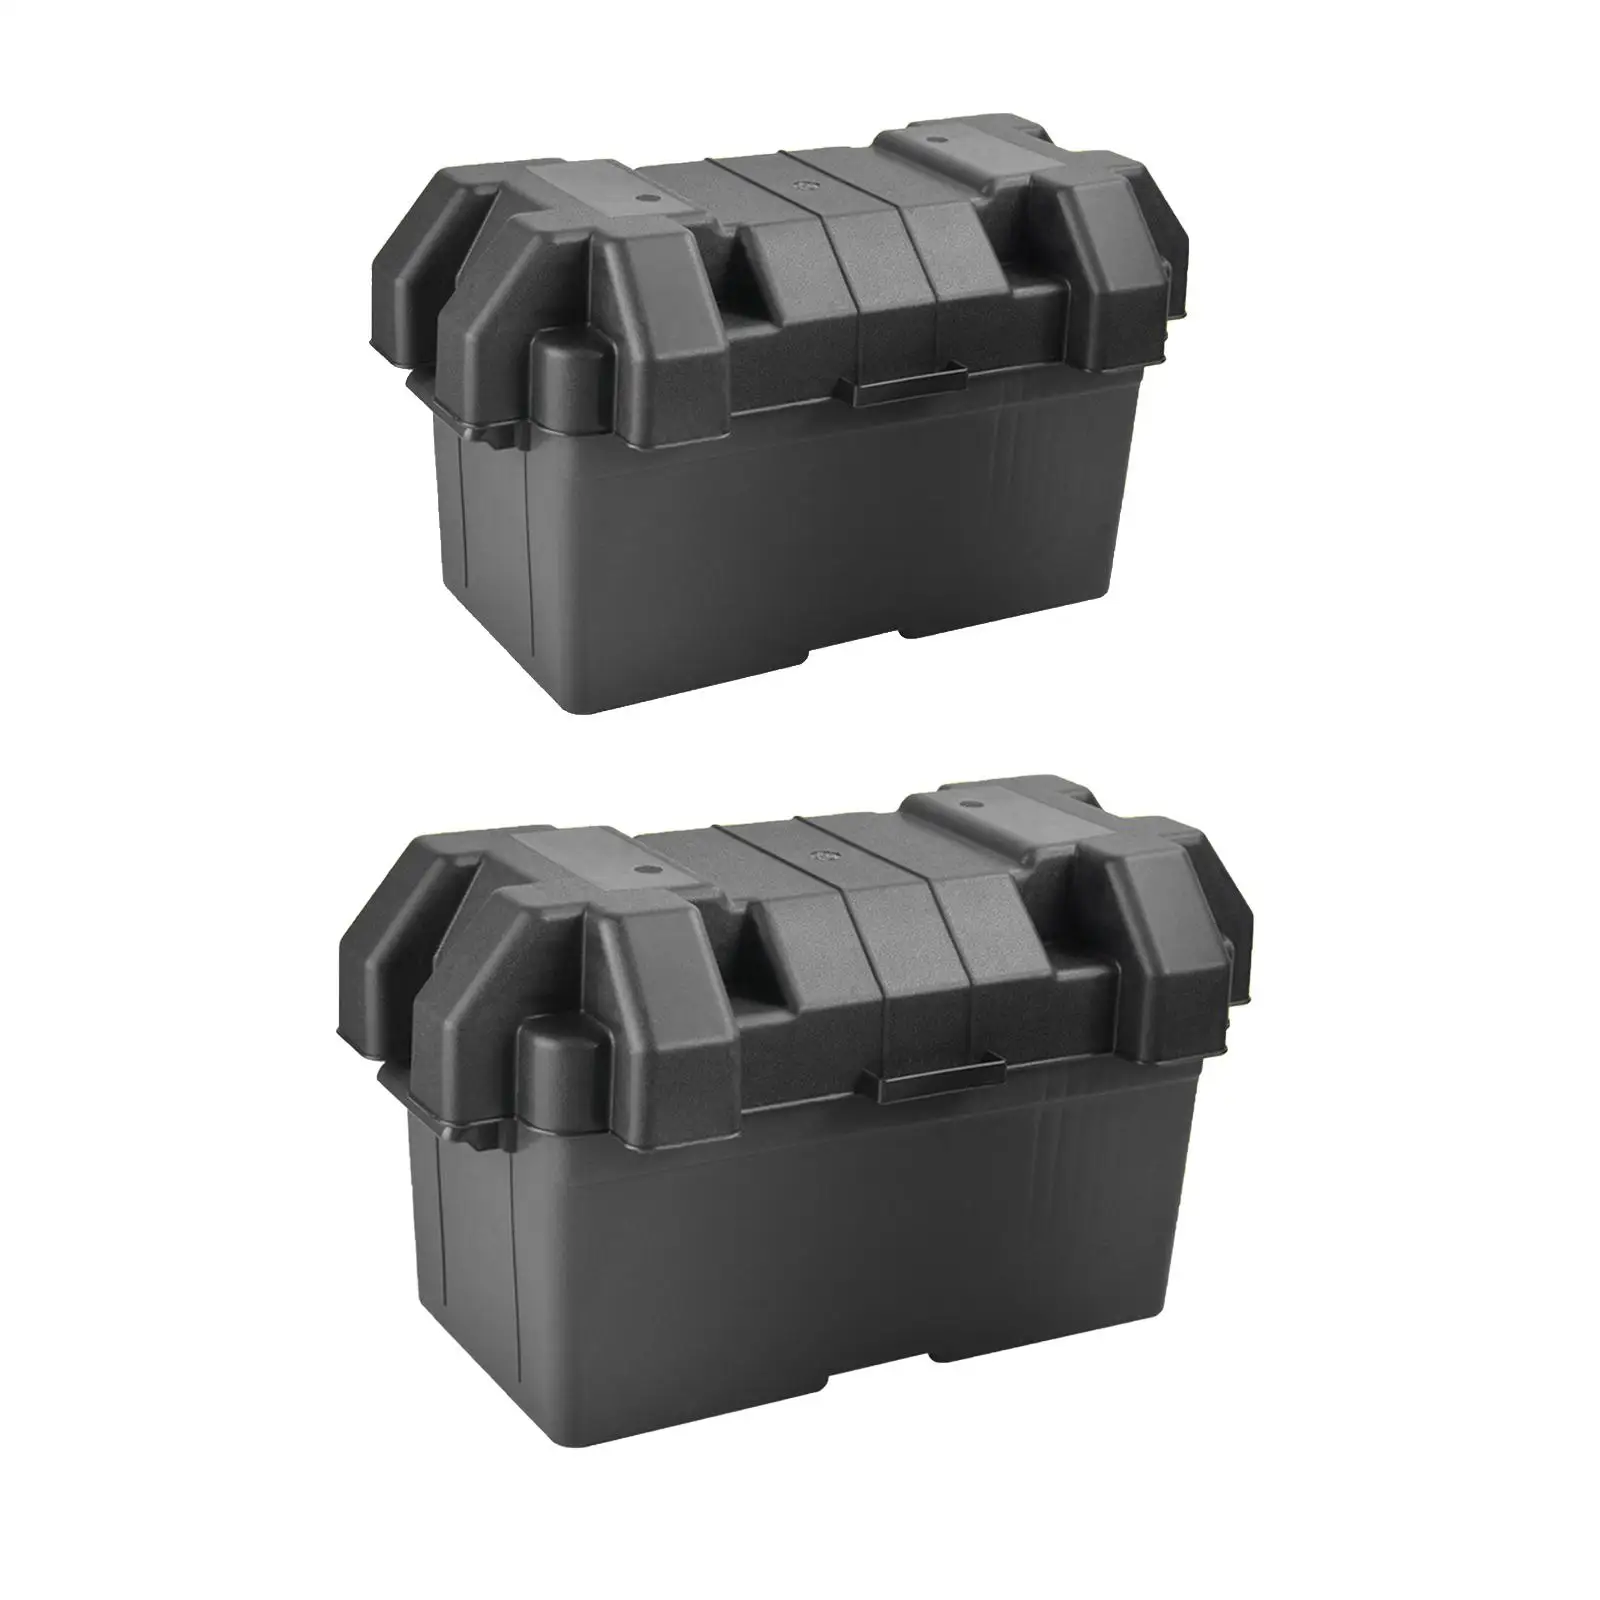 Battery Box with Strap Travel Trailer Batteries Durable Practical Impact Resistance Container for Camper Boat Car RV Travel